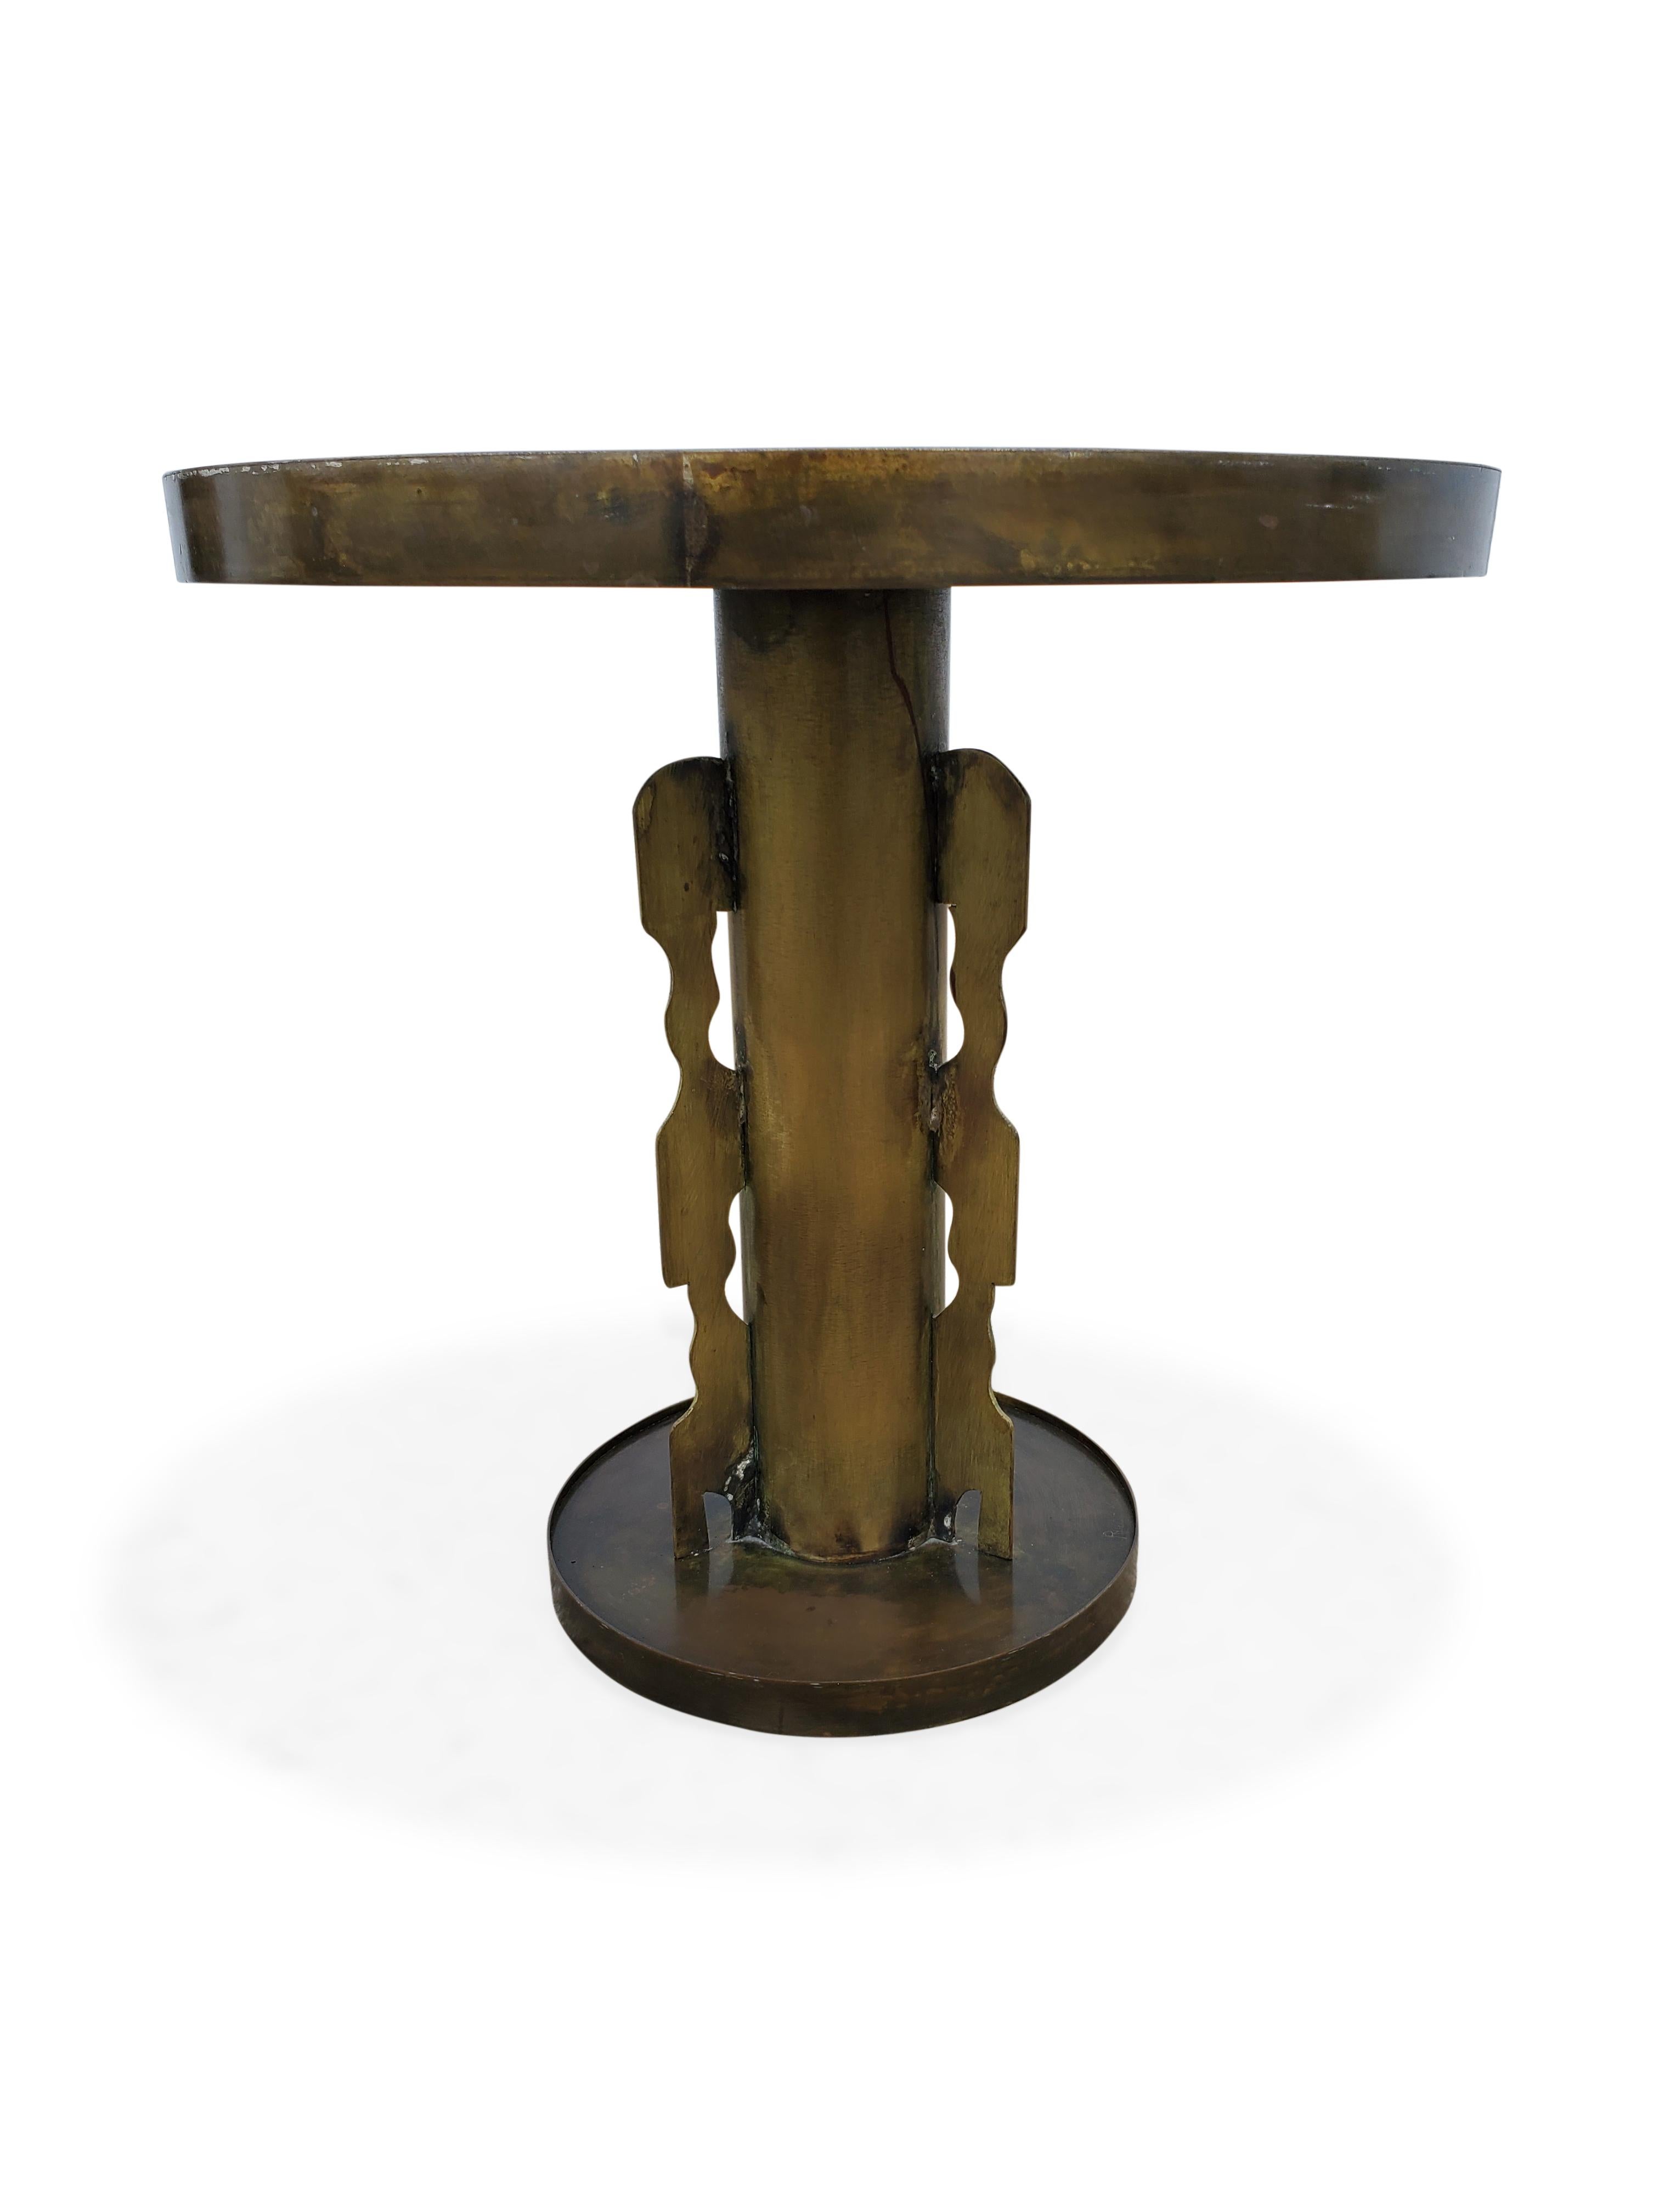 Philip & Kelvin LaVerne round side table.

Table is signed, acid etched and patinated cloud like surface on top of table.